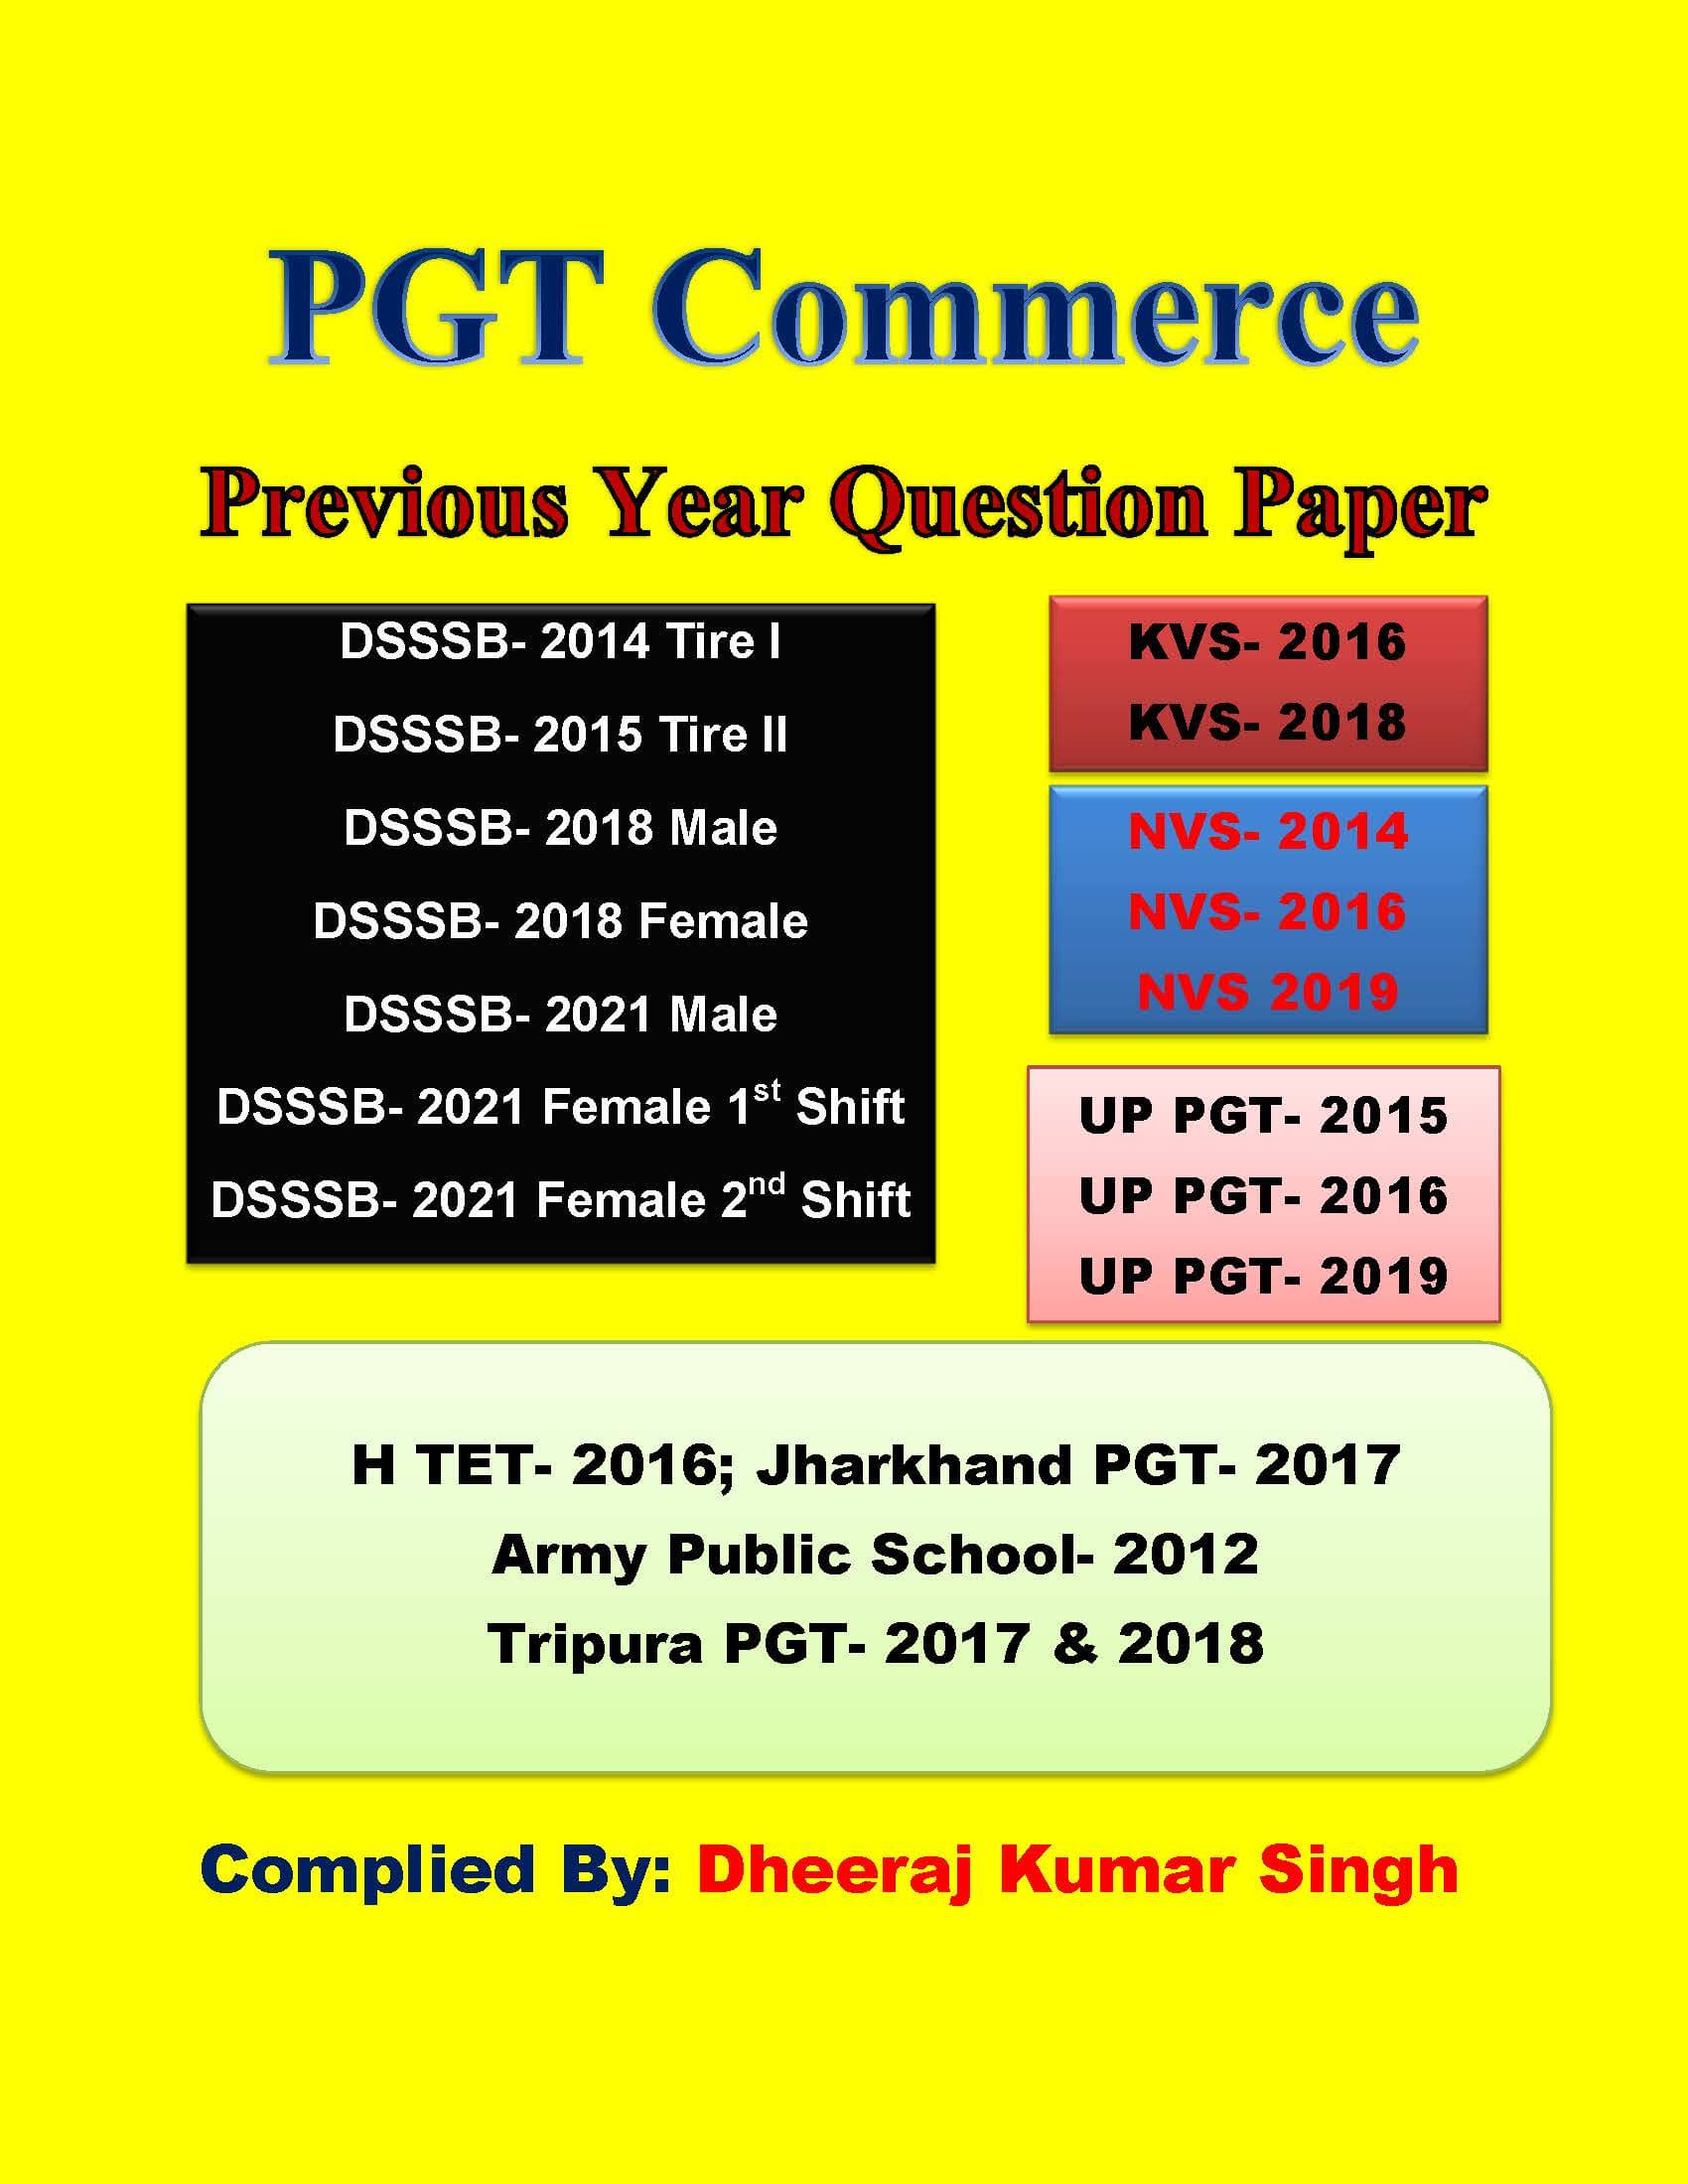 phd entrance exam question paper for commerce